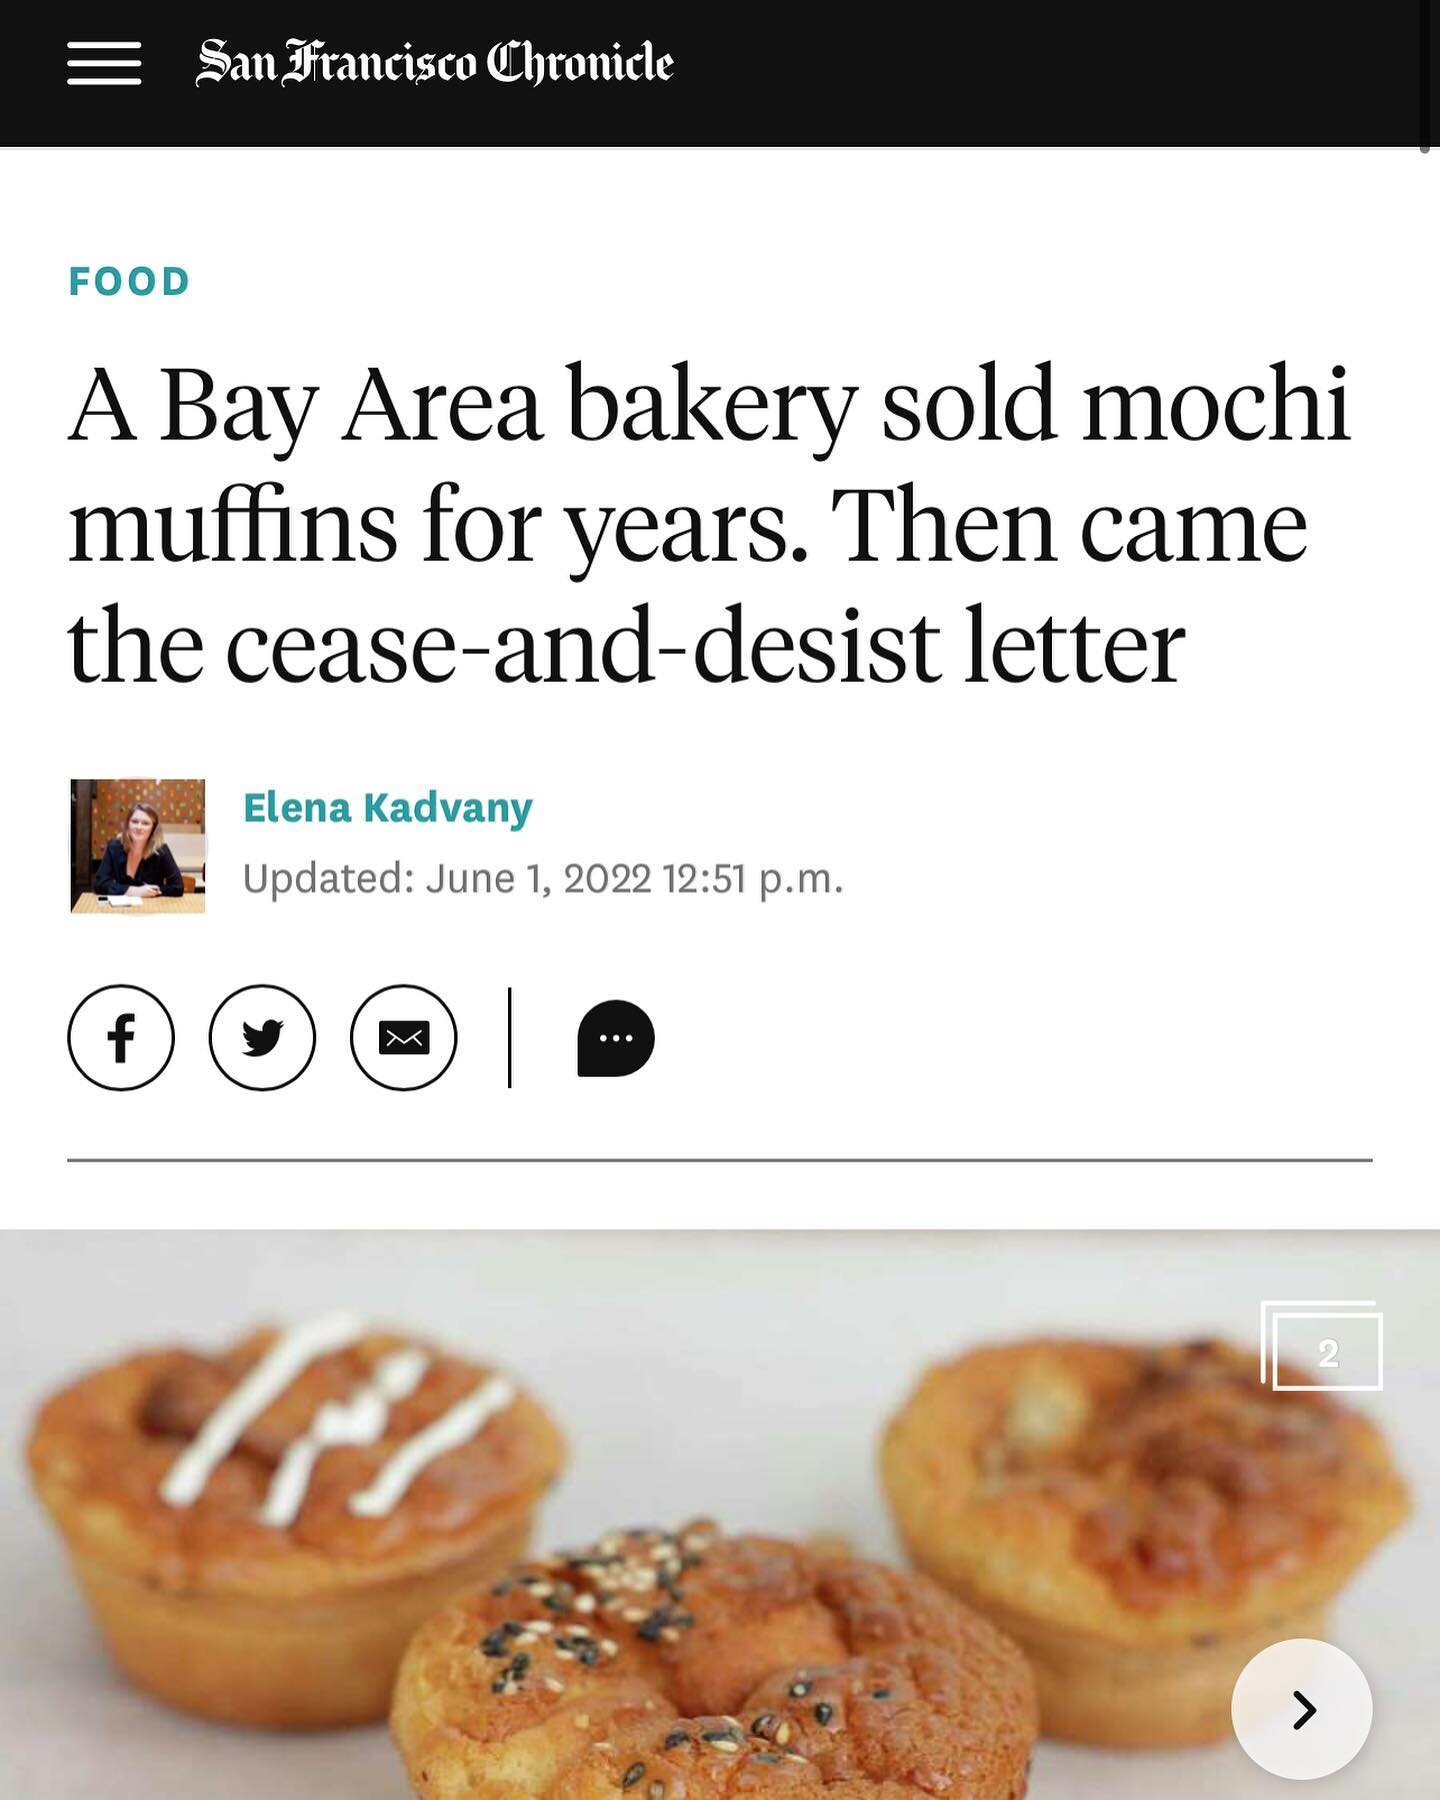 Hey ya&rsquo;ll, we&rsquo;ve been getting a lot of friendly messages and support regarding an SF Chronicle article about Third Culture and trademarking &ldquo;Mochi Muffin&rdquo;. 

We wanted to add some clarification. SF Chronicle had reached out to